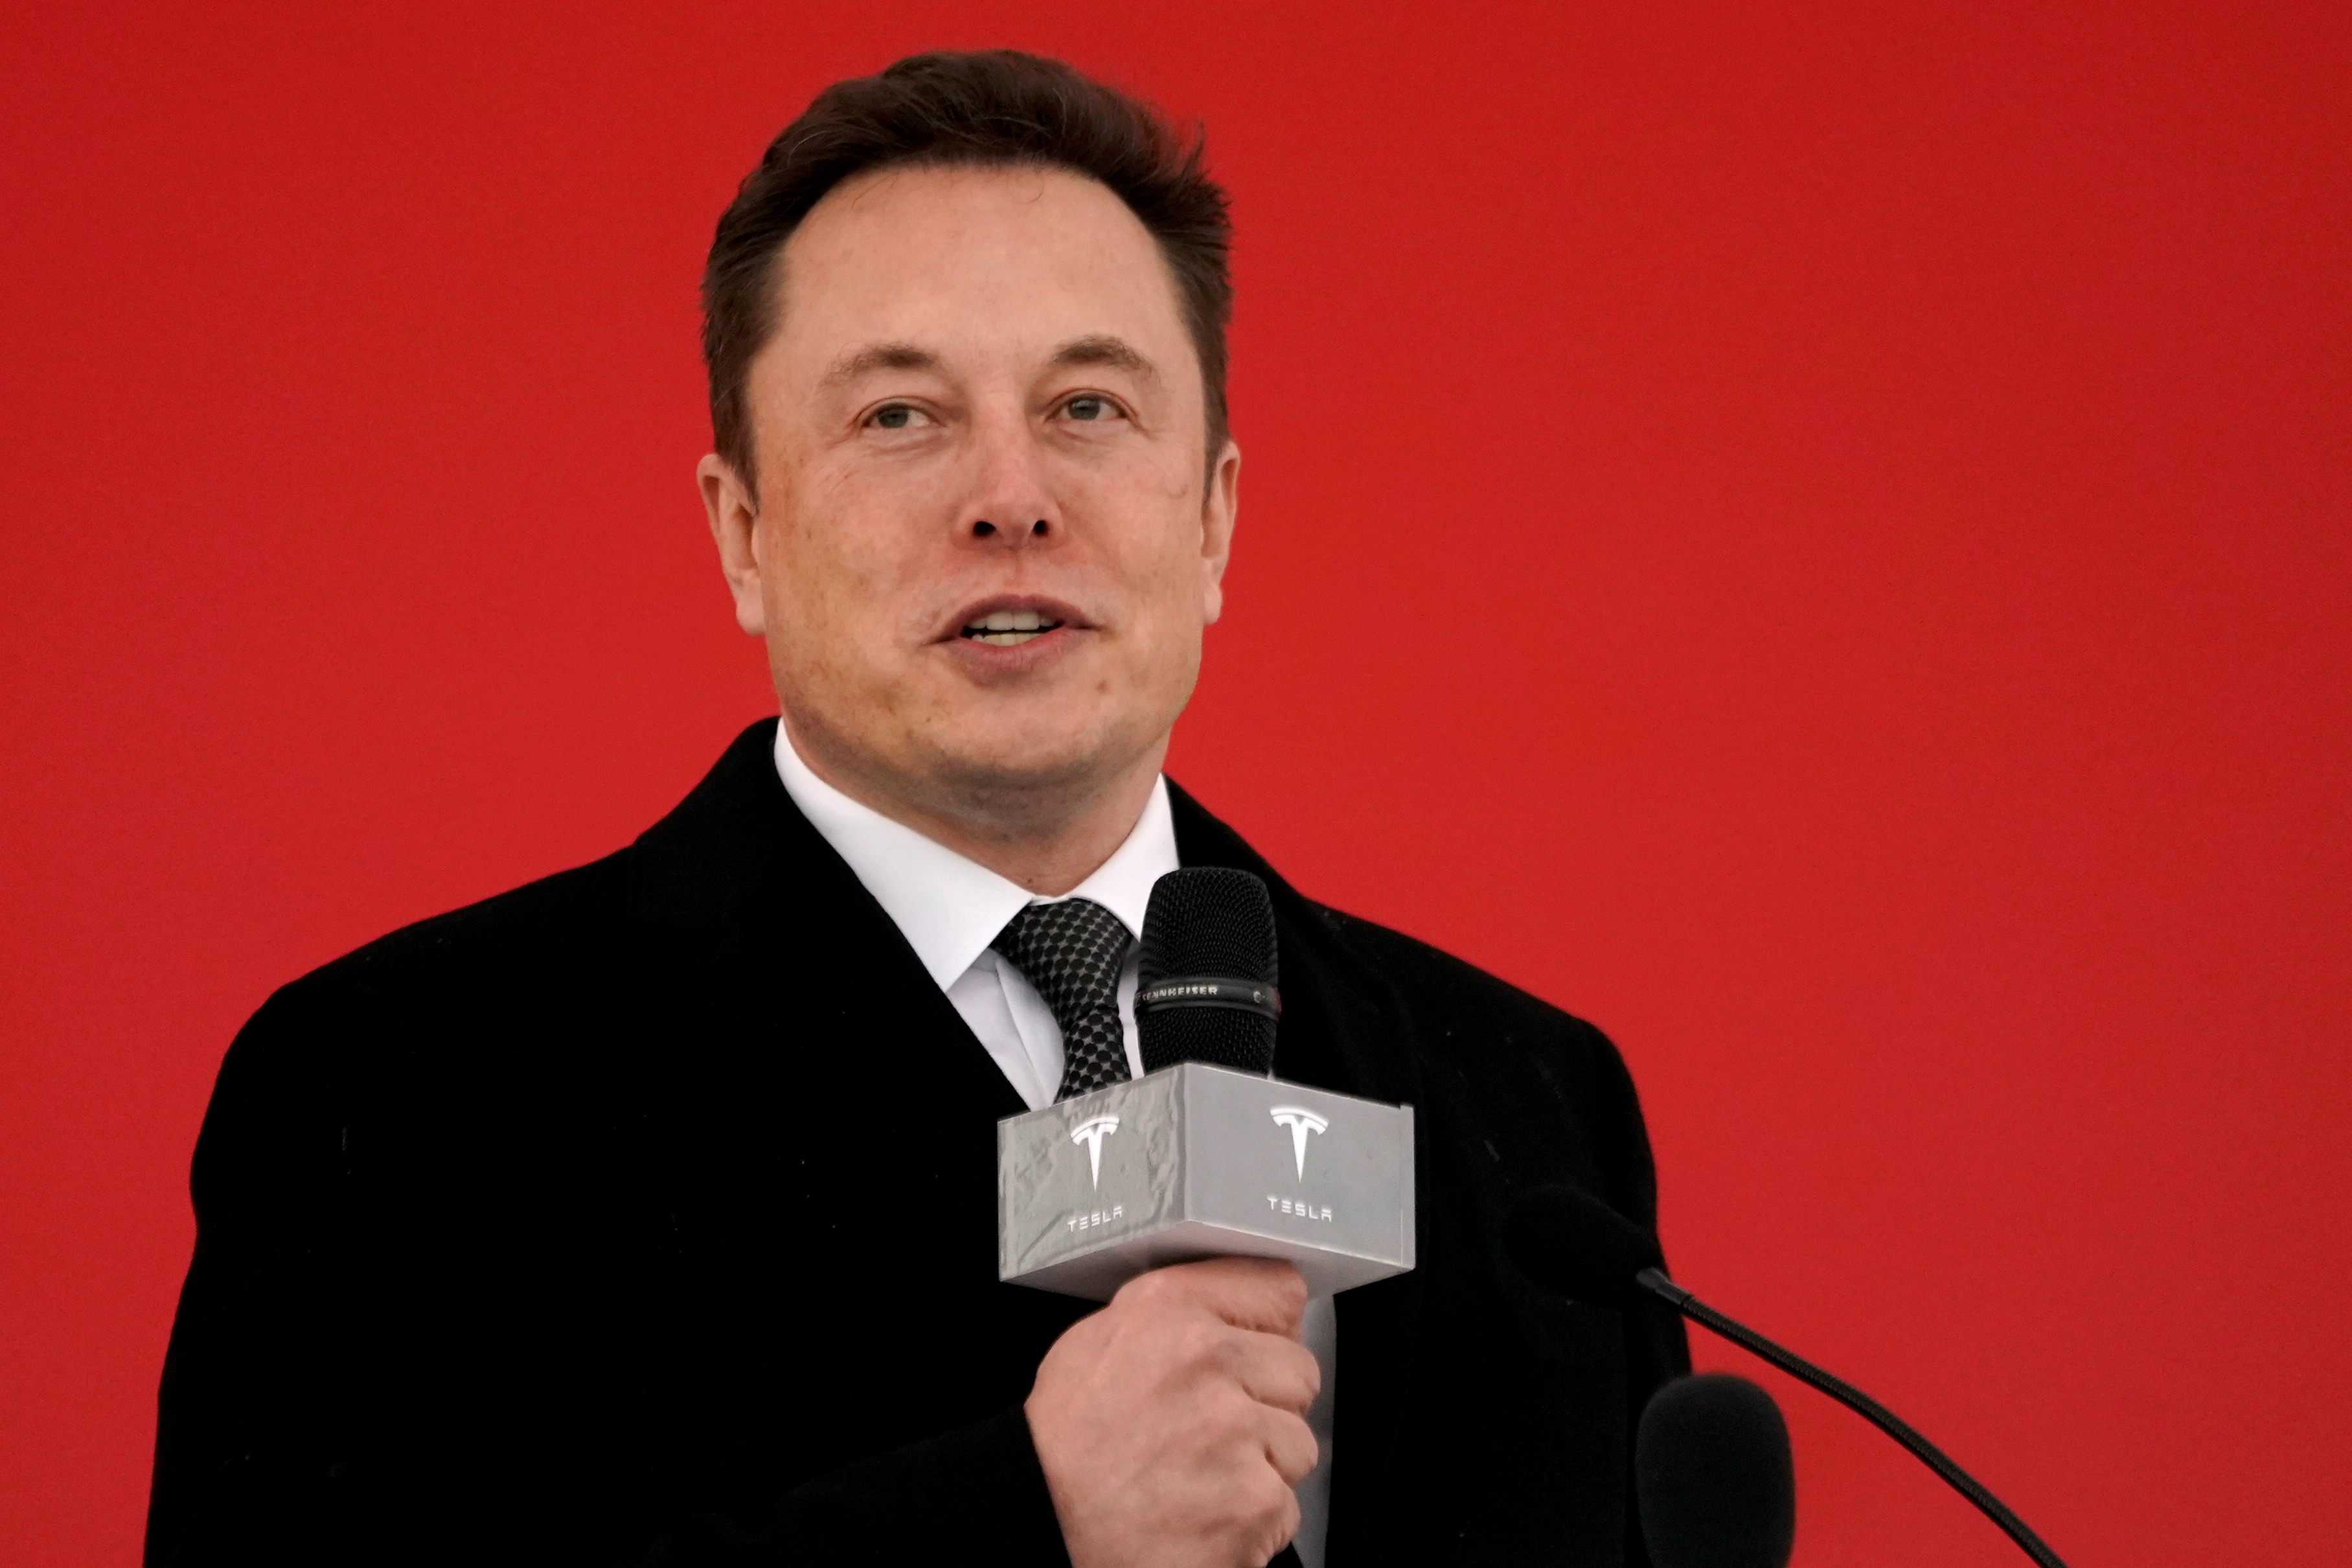 Tesla CEO Elon Musk attends the Tesla Shanghai Gigafactory groundbreaking ceremony in Shanghai, China January 7, 2019. REUTERS/Aly Song/File Photo